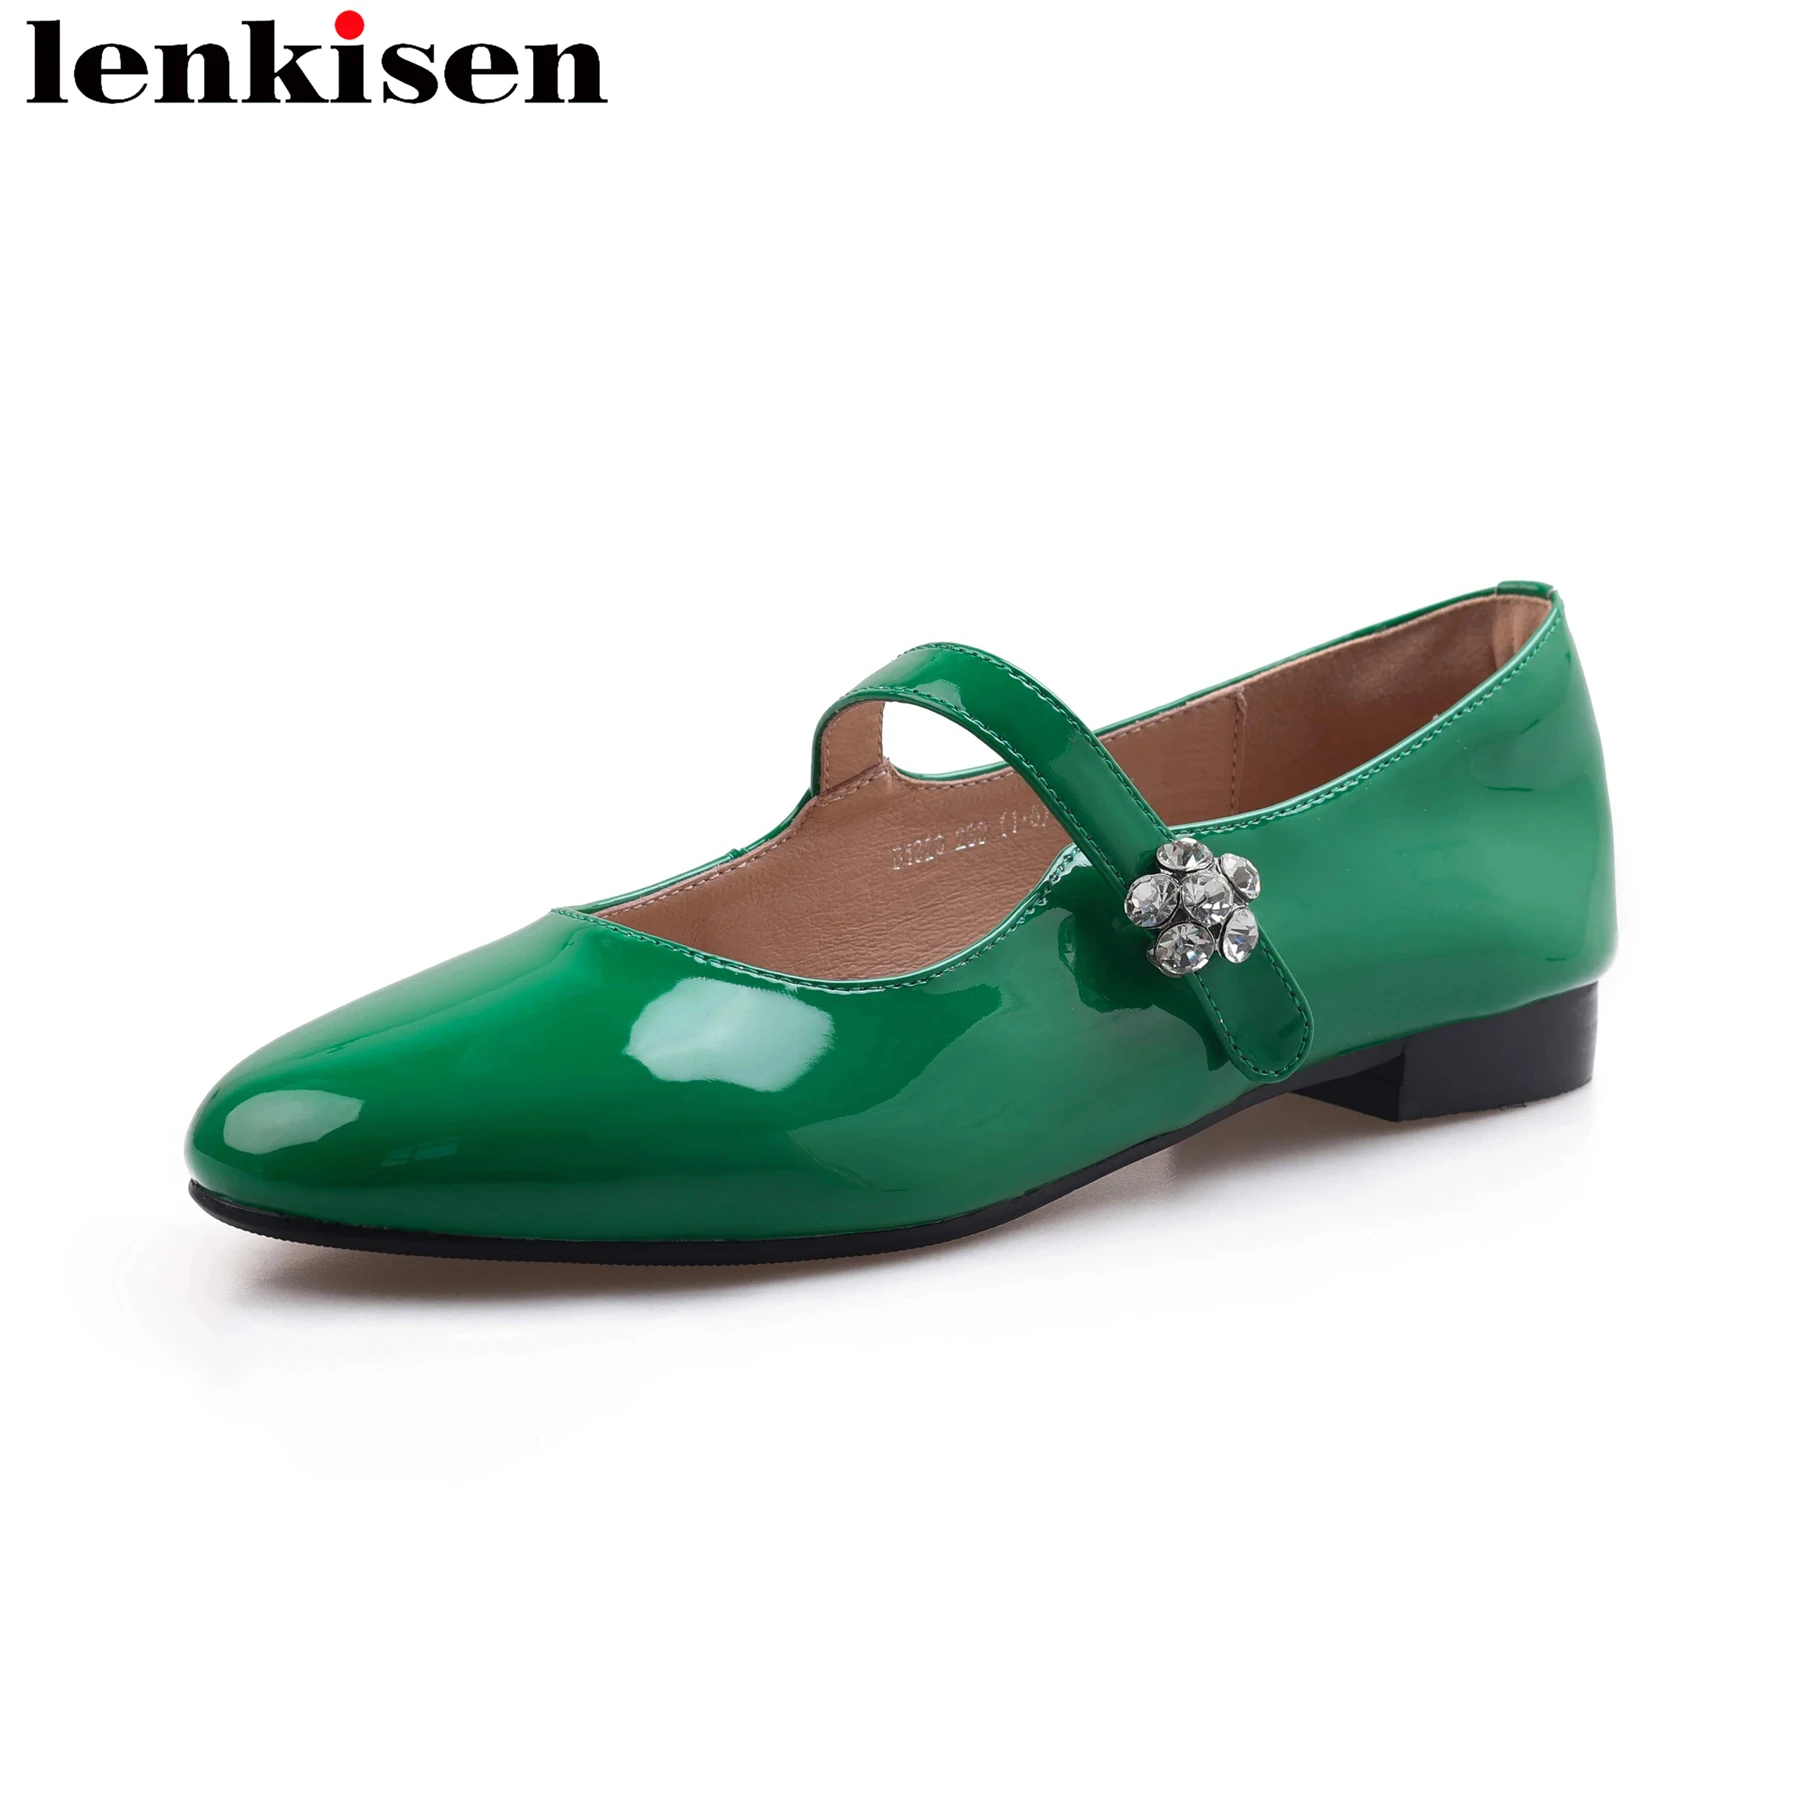 

Lenkisen Sheep Leather Crystal Round Toe Mary Janes Shallow Low Heels Spring Summer Elegant Office Lady Concise Women Ins Pumps